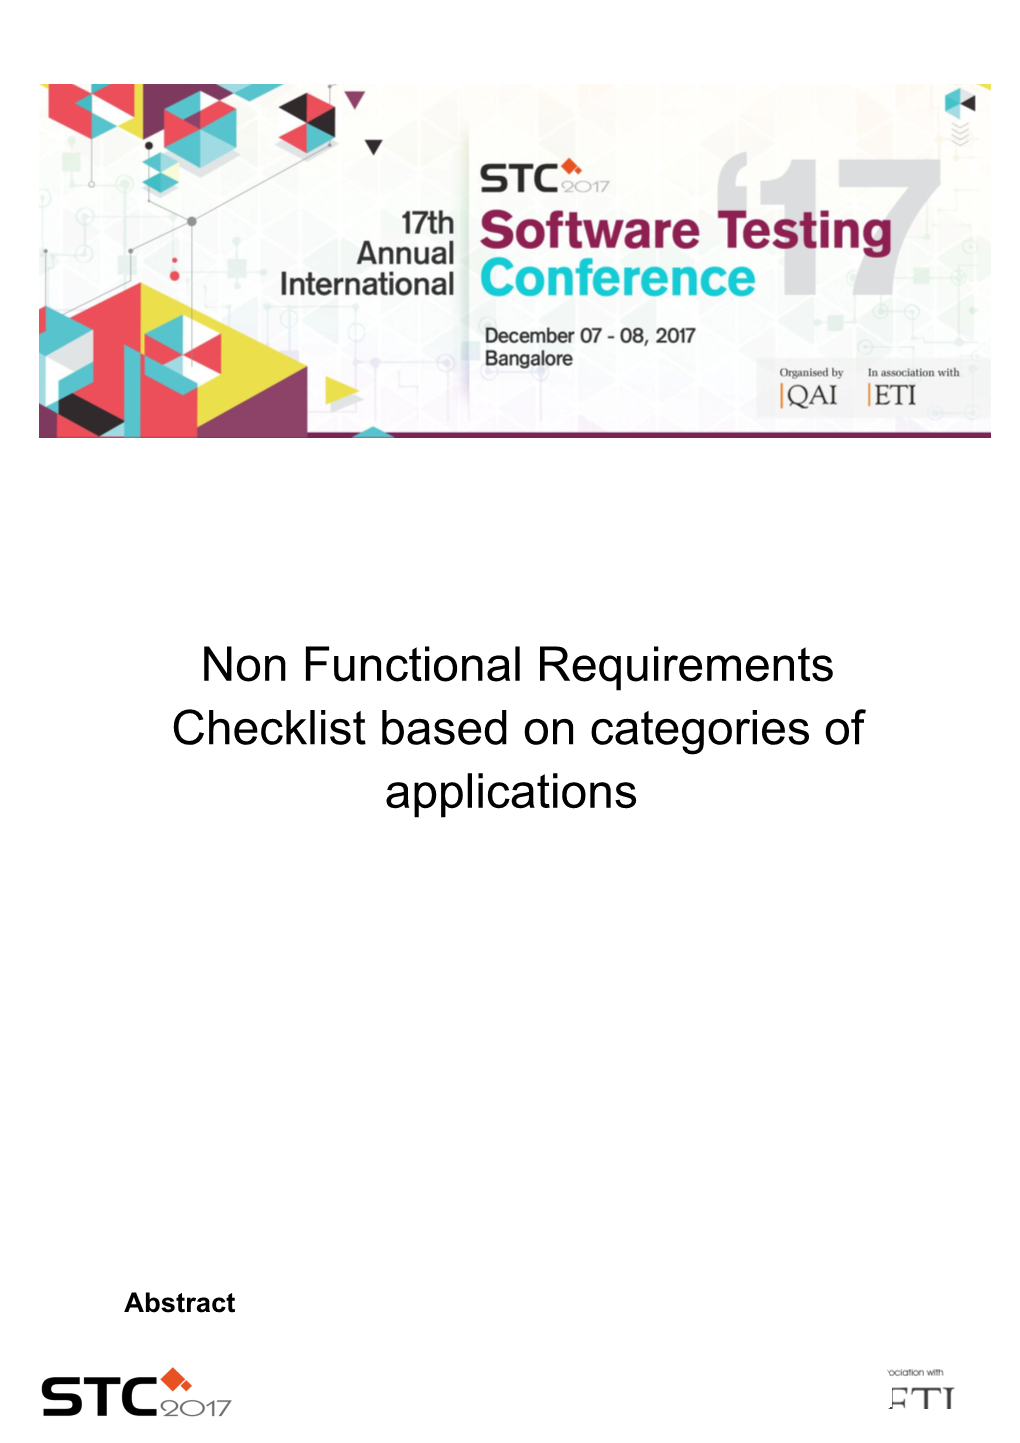 Non Functional Requirements Checklist Based on Categories of Applications